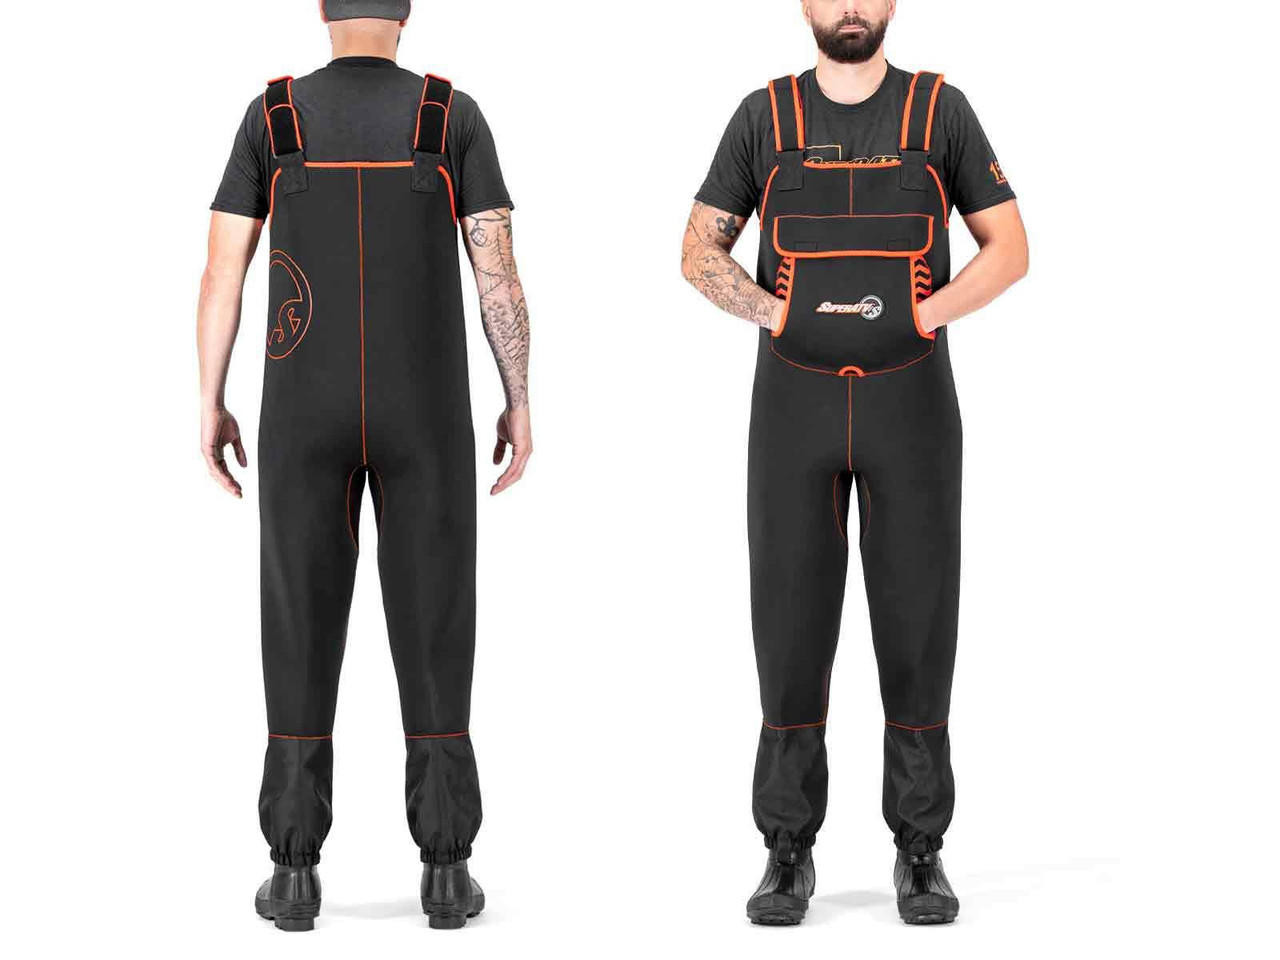 TOP 10 Neoprene Waders Manufacturers in The World, by Oneier-Eric